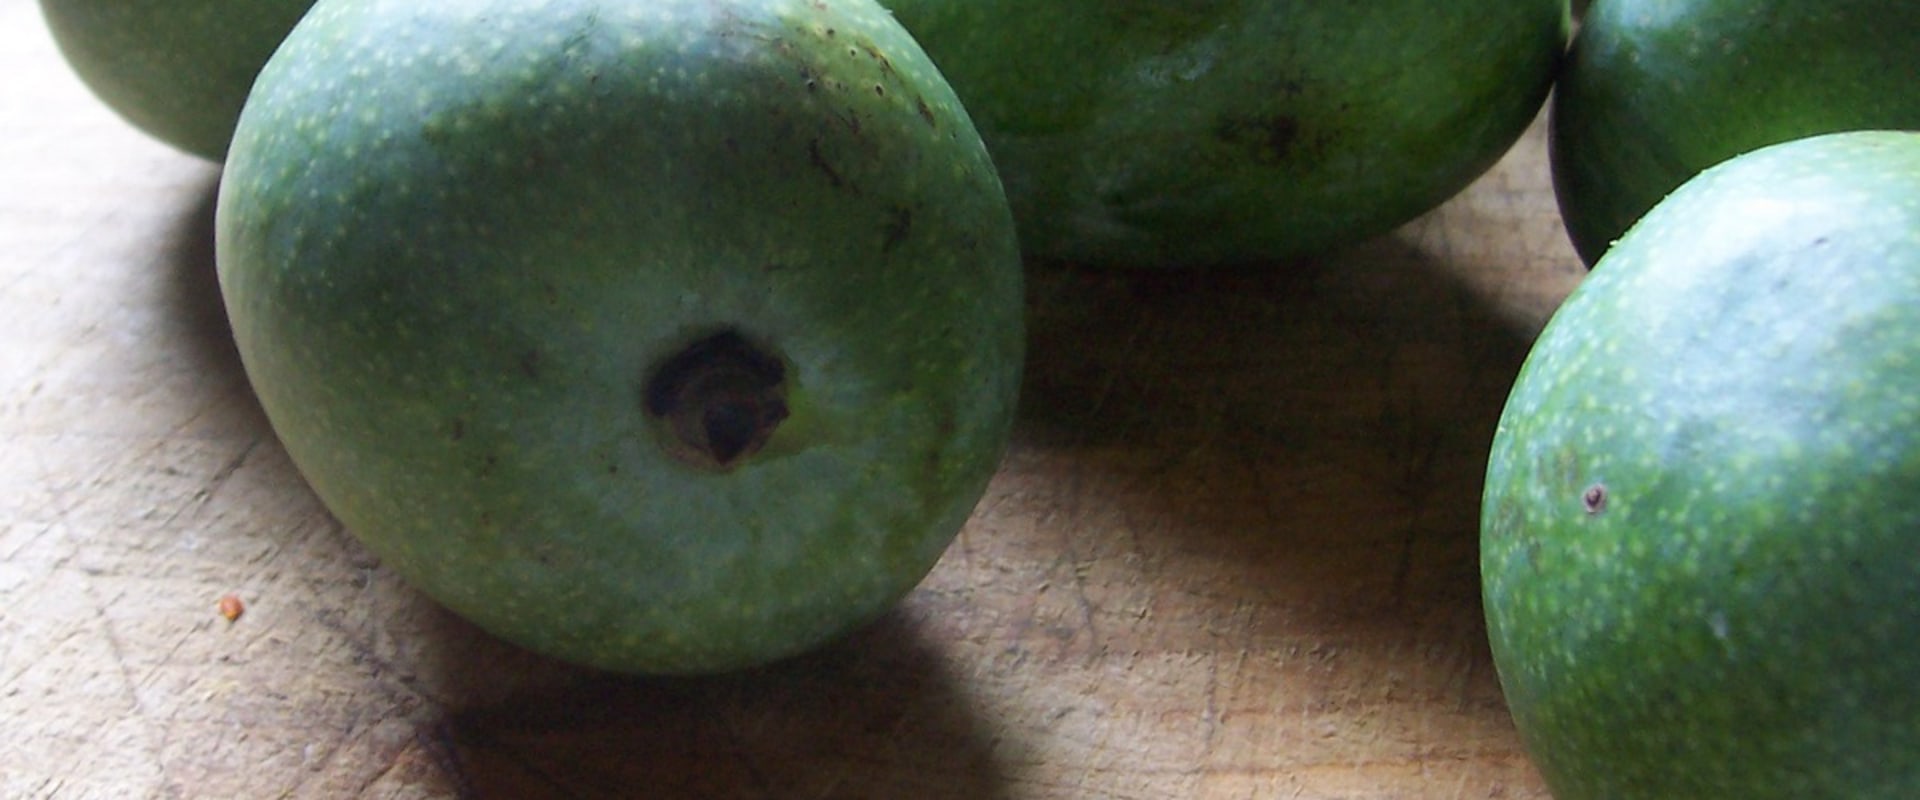 Which Raw Mango is Best for Pickling?